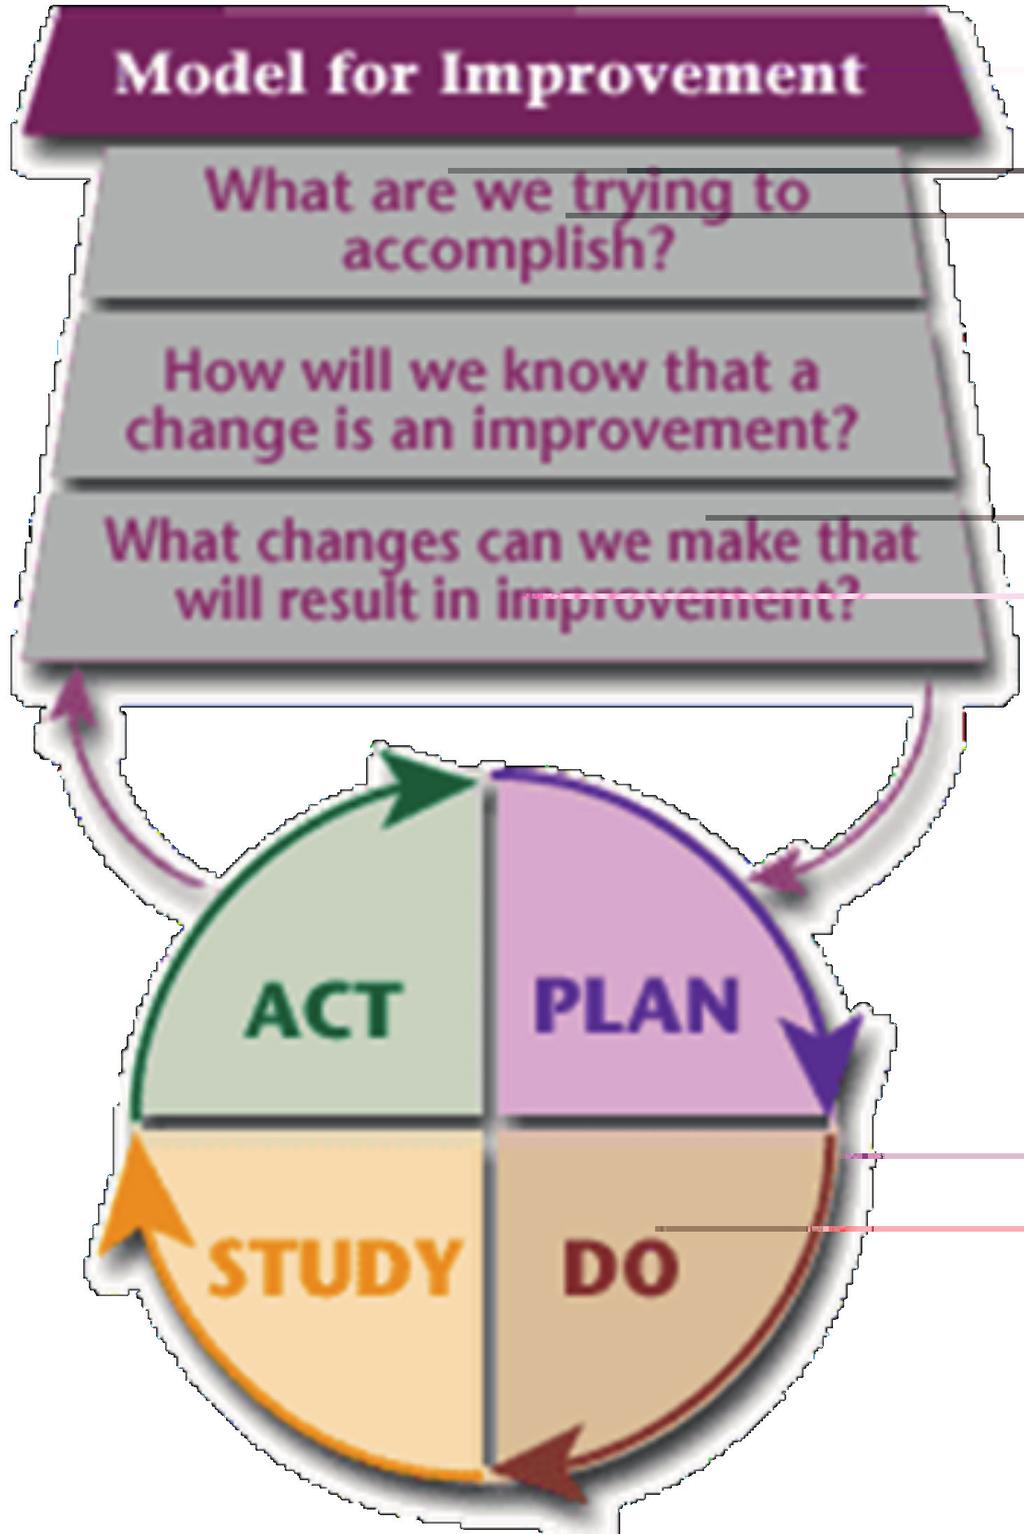 Appendices section Appendix 1 Quality Improvement Methodology -The Model for Improvement A range of traditional quality improvement principles and methods will underpin this programme of work.